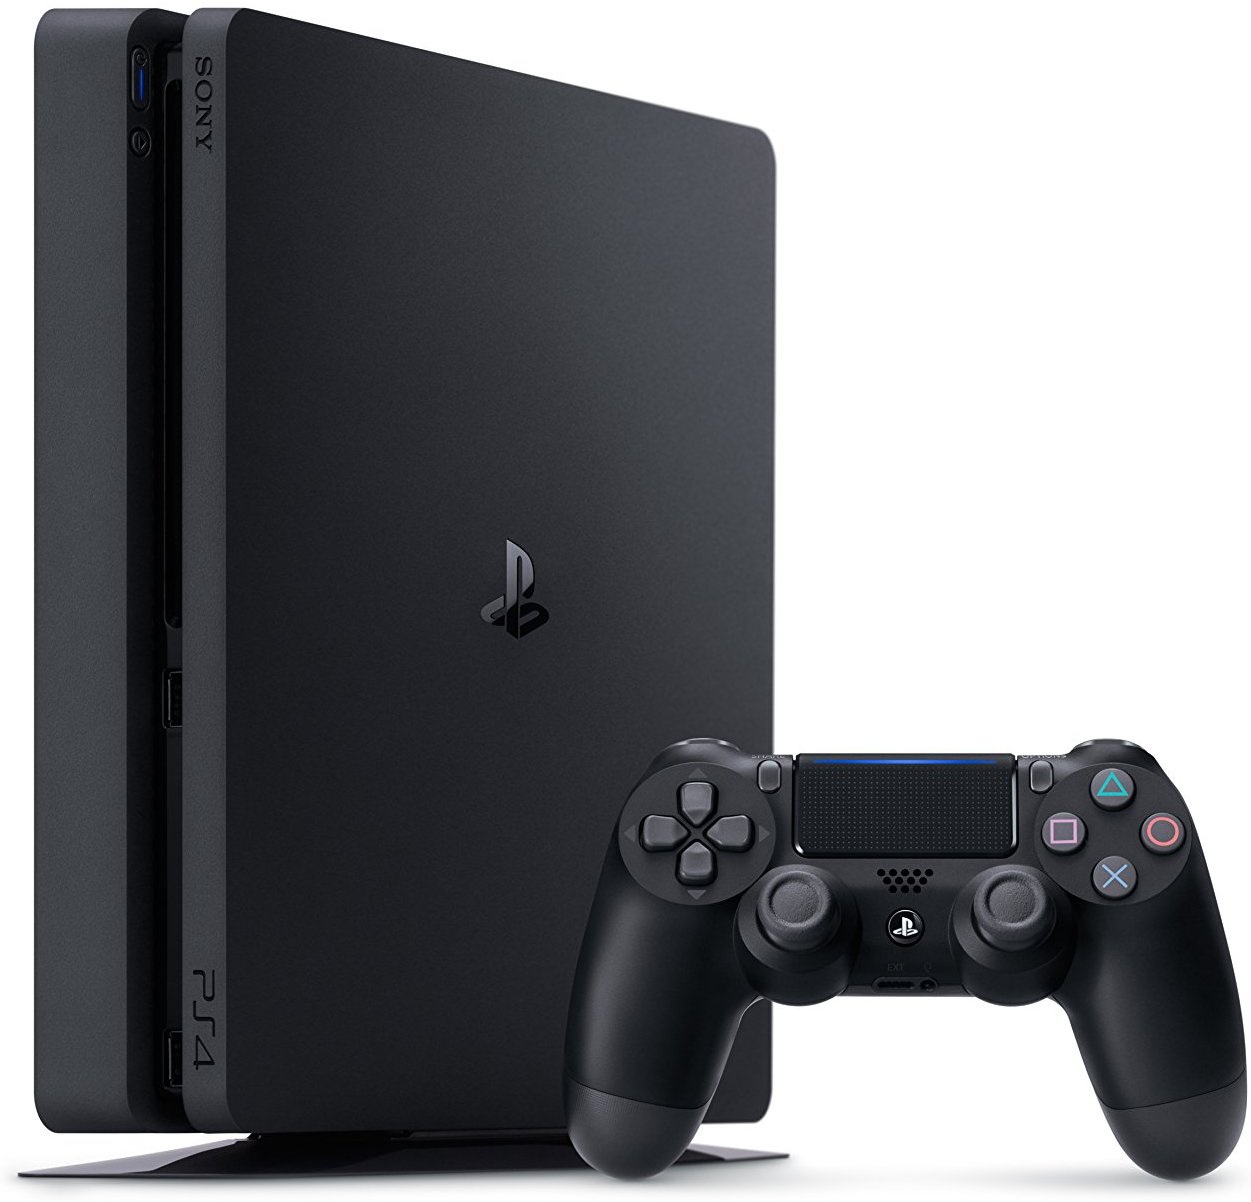 Playstation 4 PS4 1TB Slim Gaming System Only $199.00! BLACK FRIDAY PRICE!